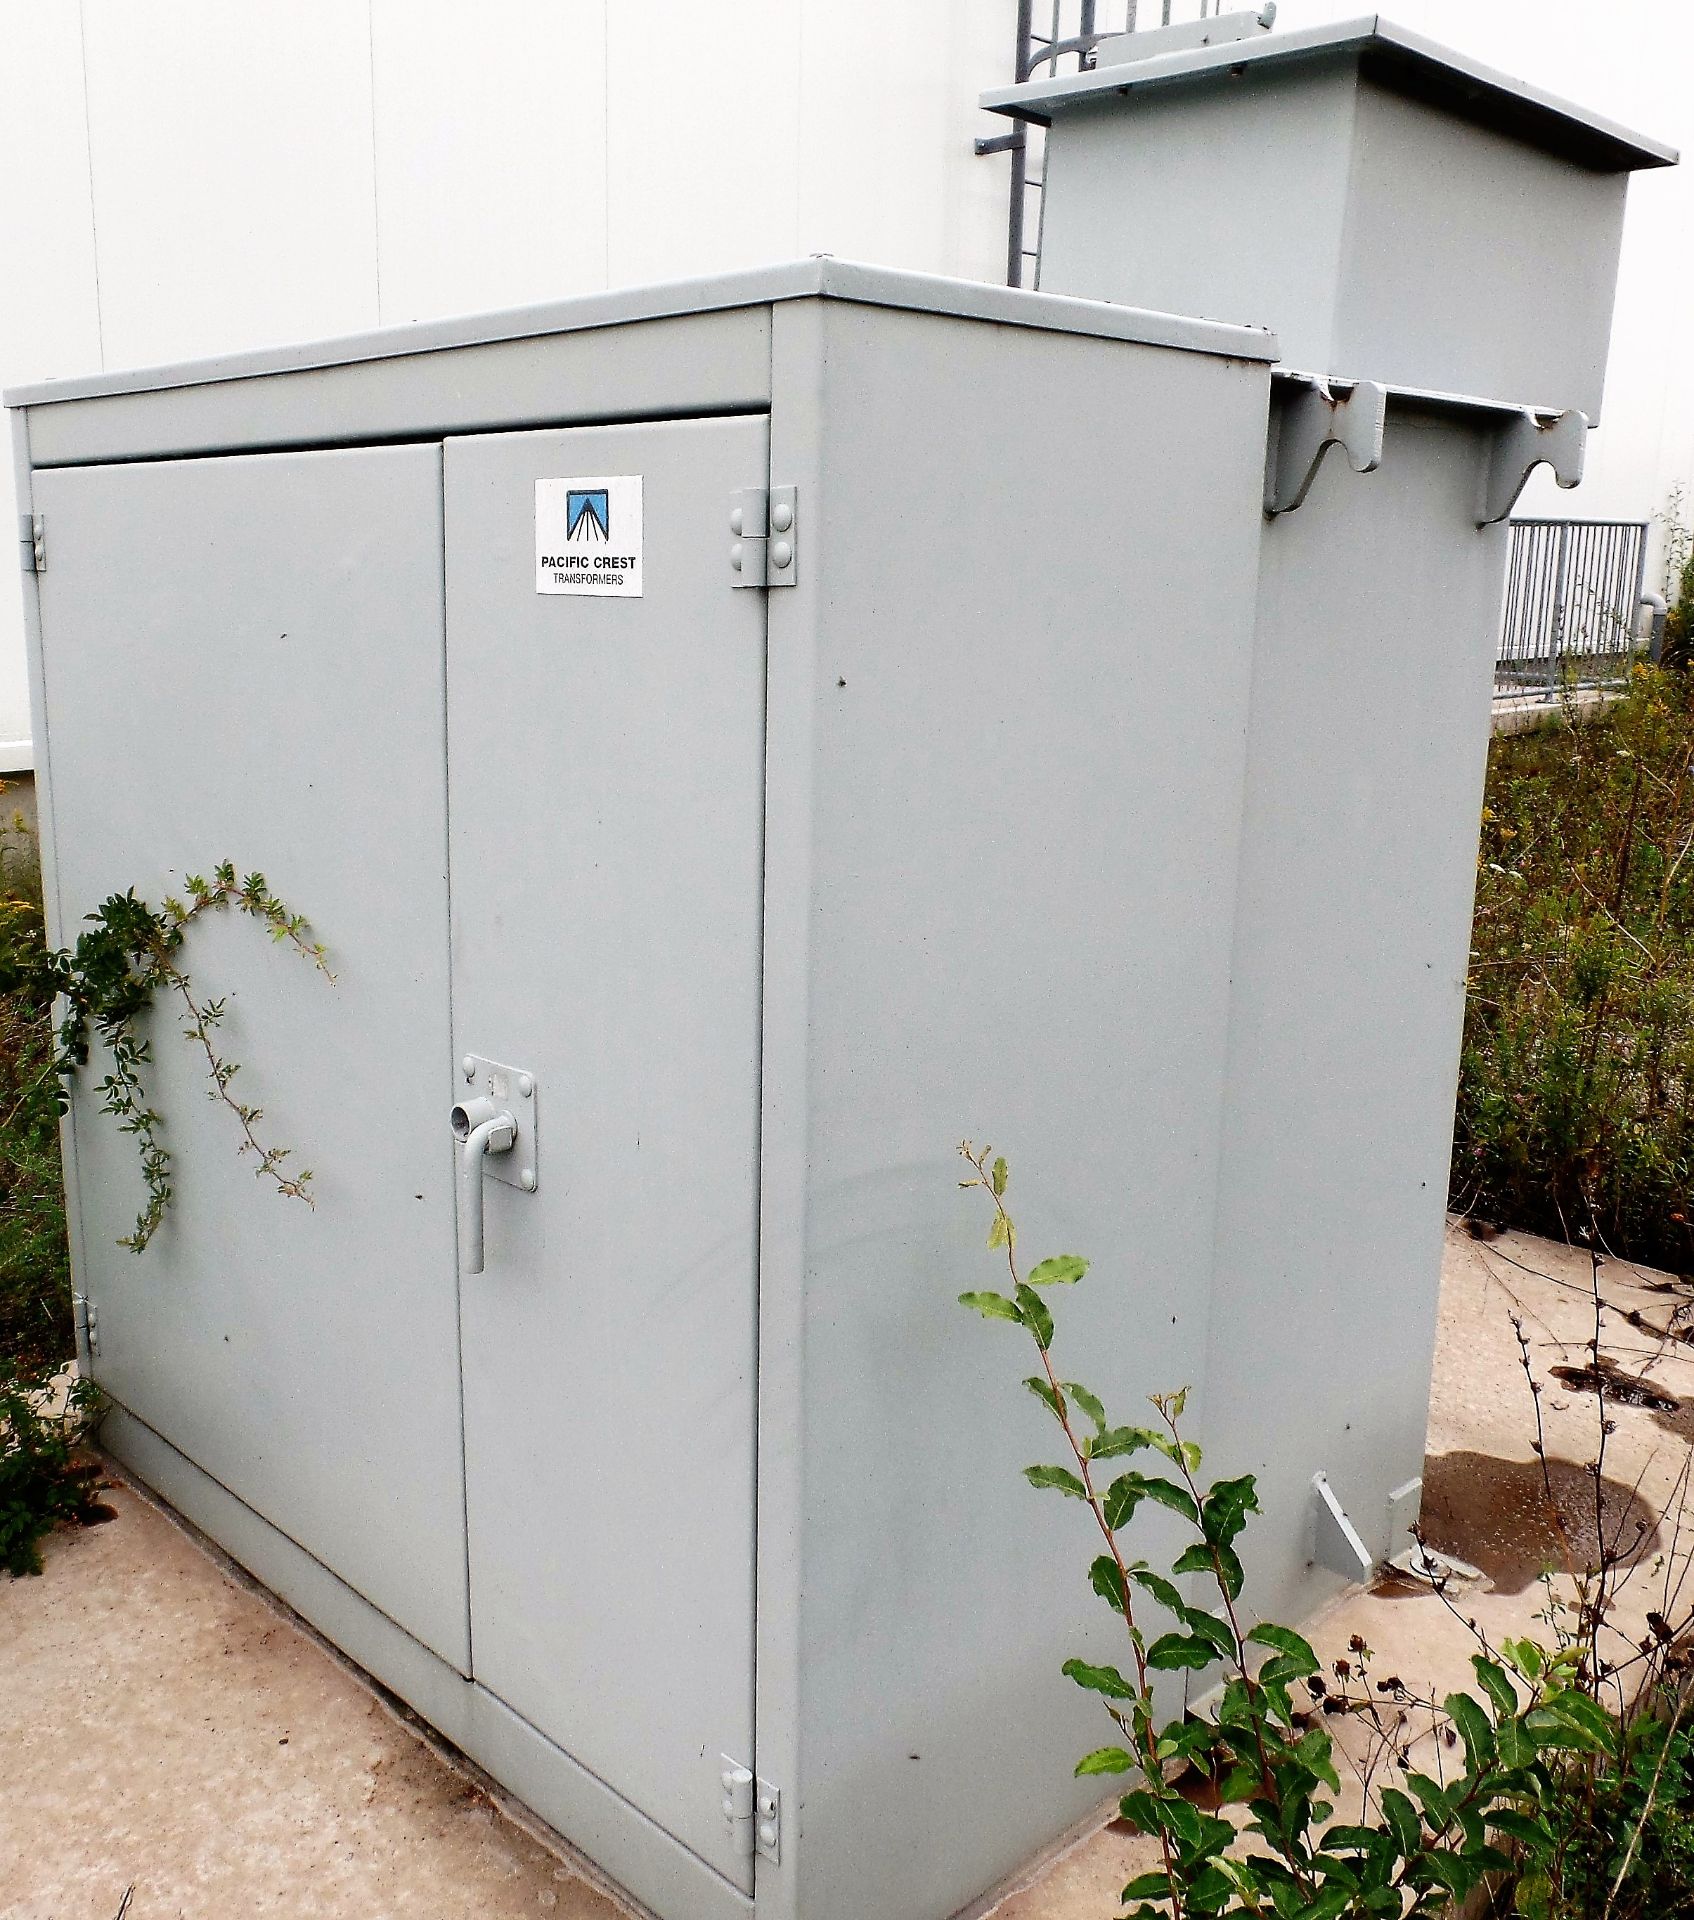 PACIFIC CREST TRANSFORMERS OUTDOOR TRANSFORMER (LOCATED AT 107 7TH CONCESSION ROAD ENR, CLEAR CREEK,